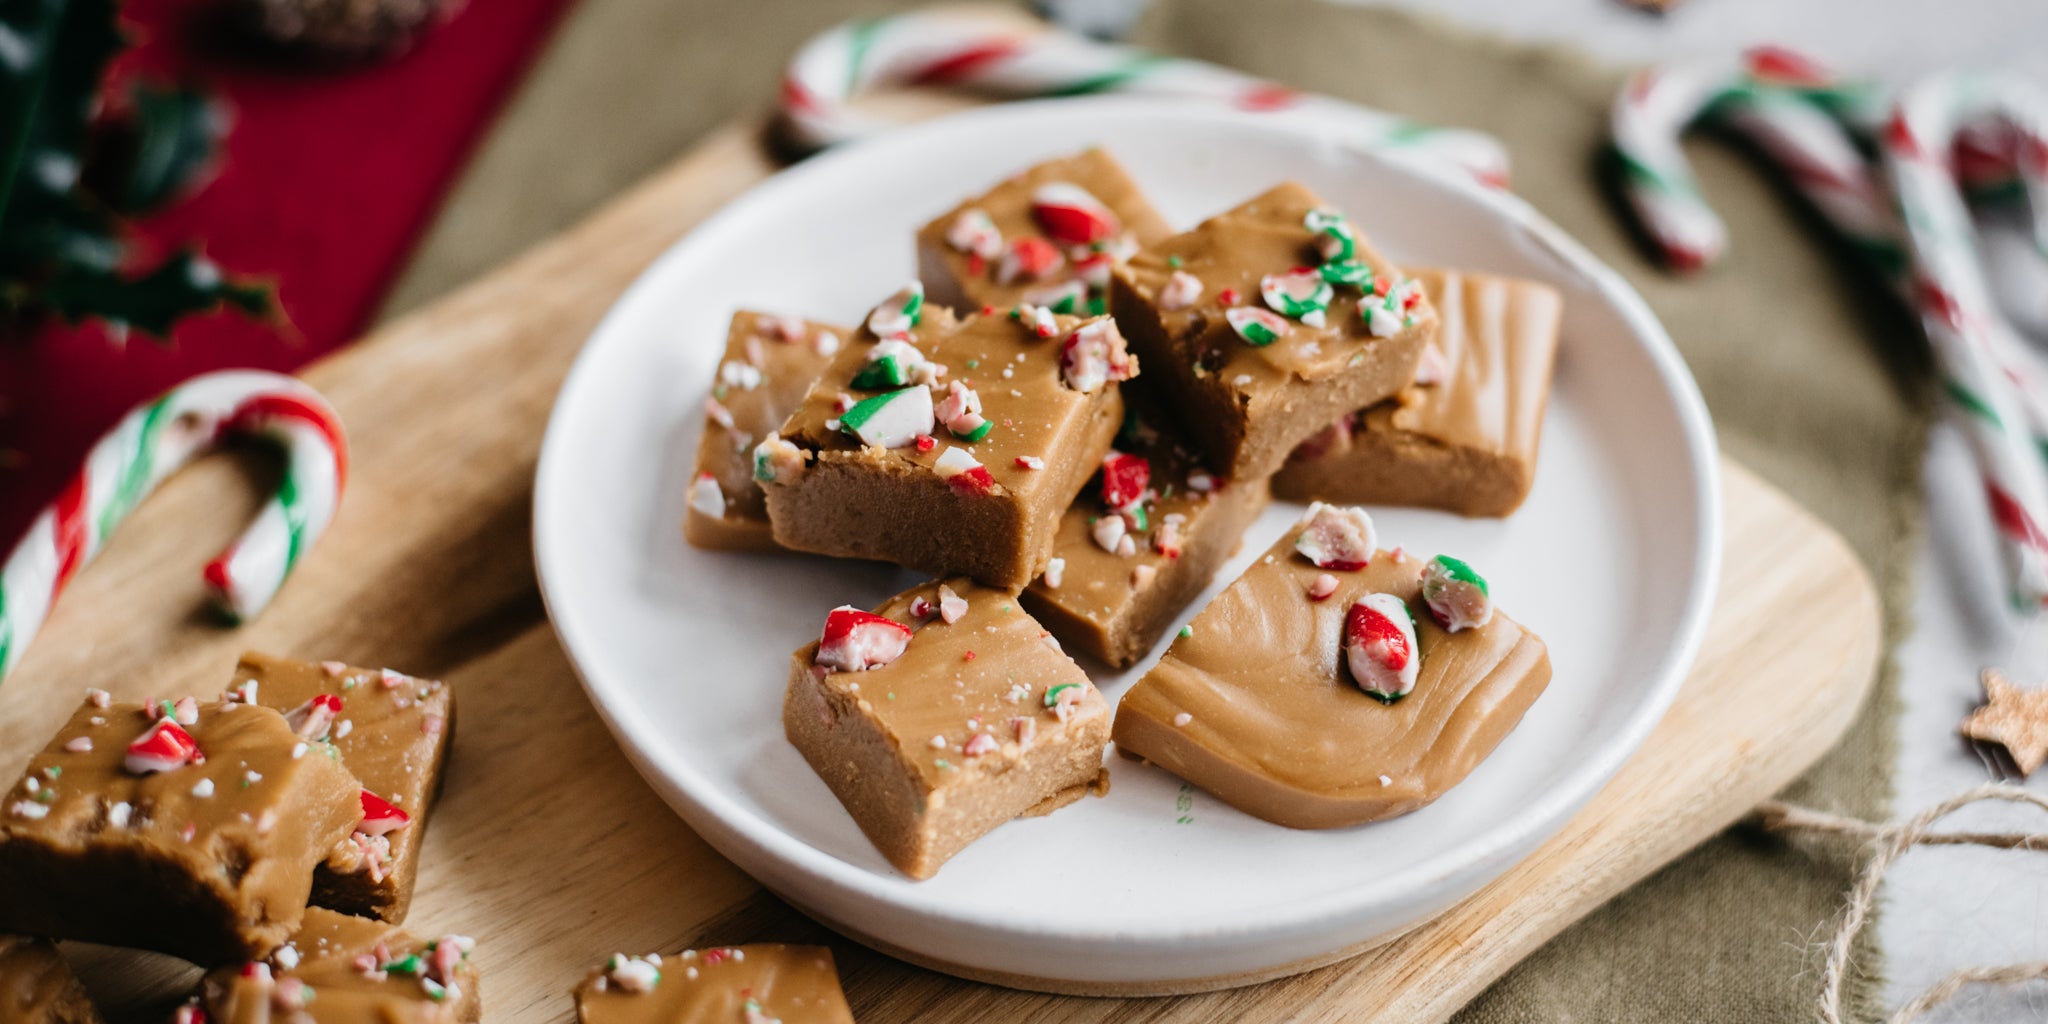 A plate of Candy Cane Fudge, sprinkled with candy cane pieces